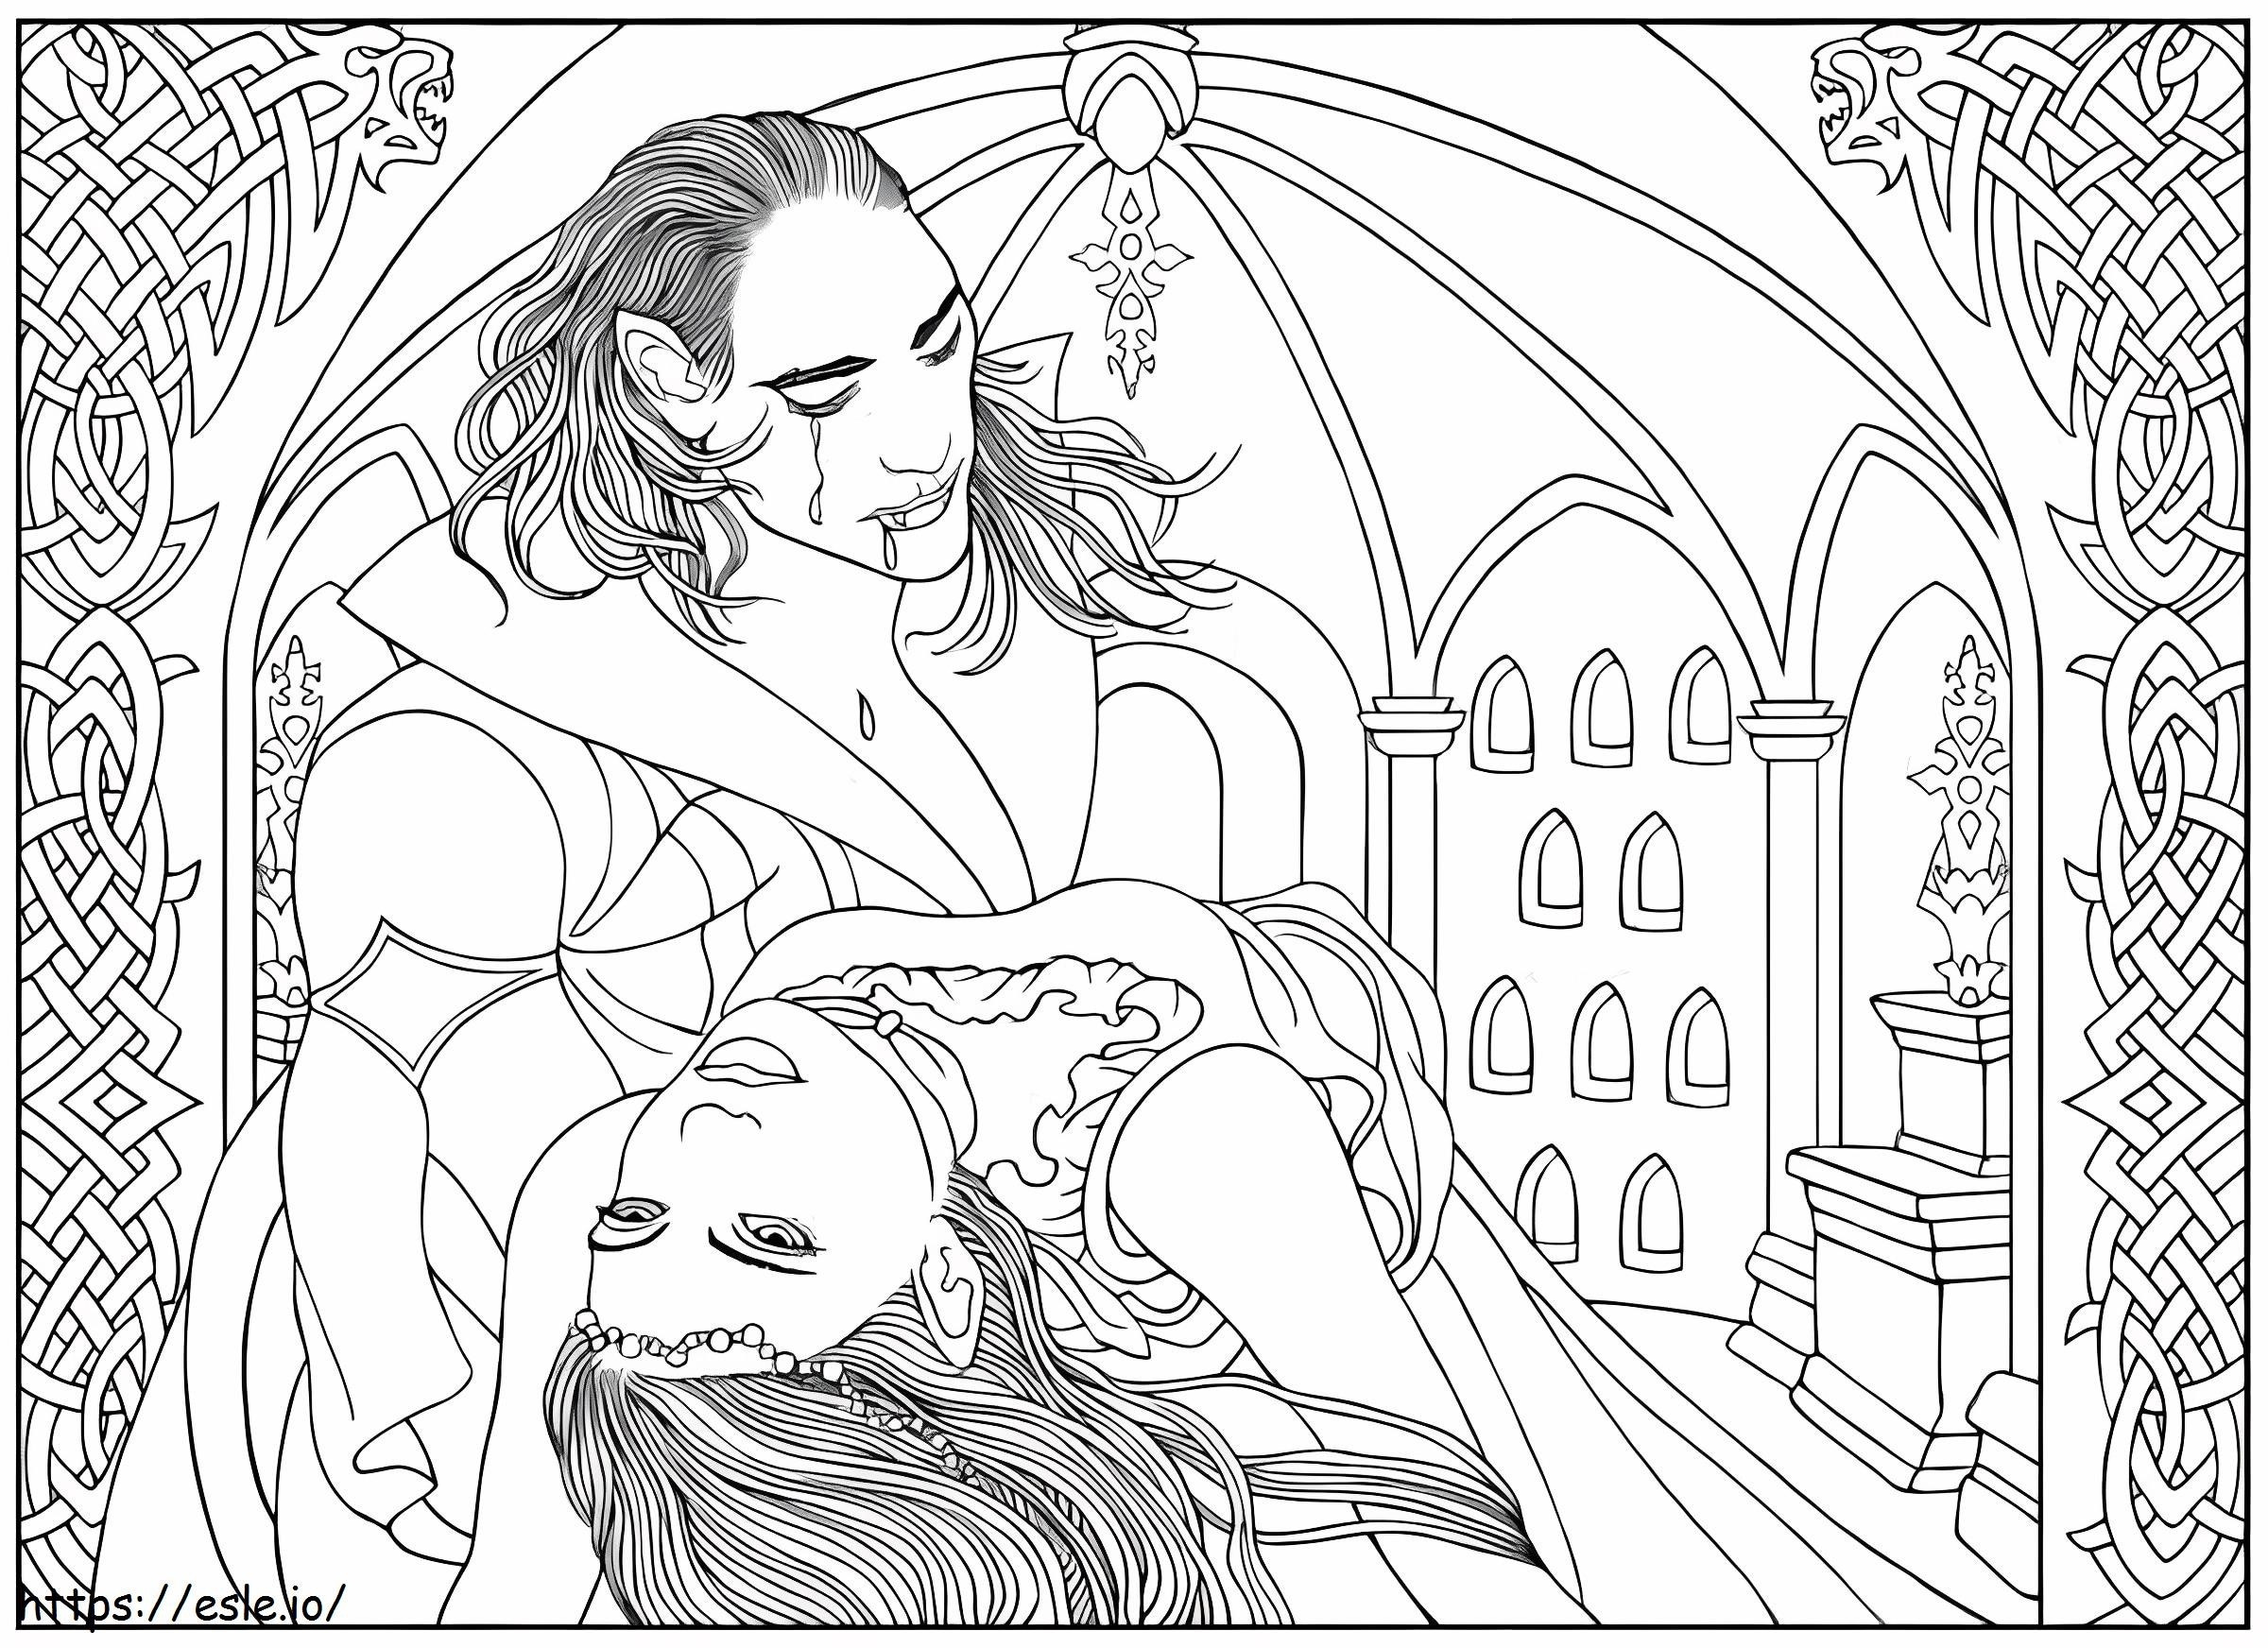 Vampire Couple coloring page